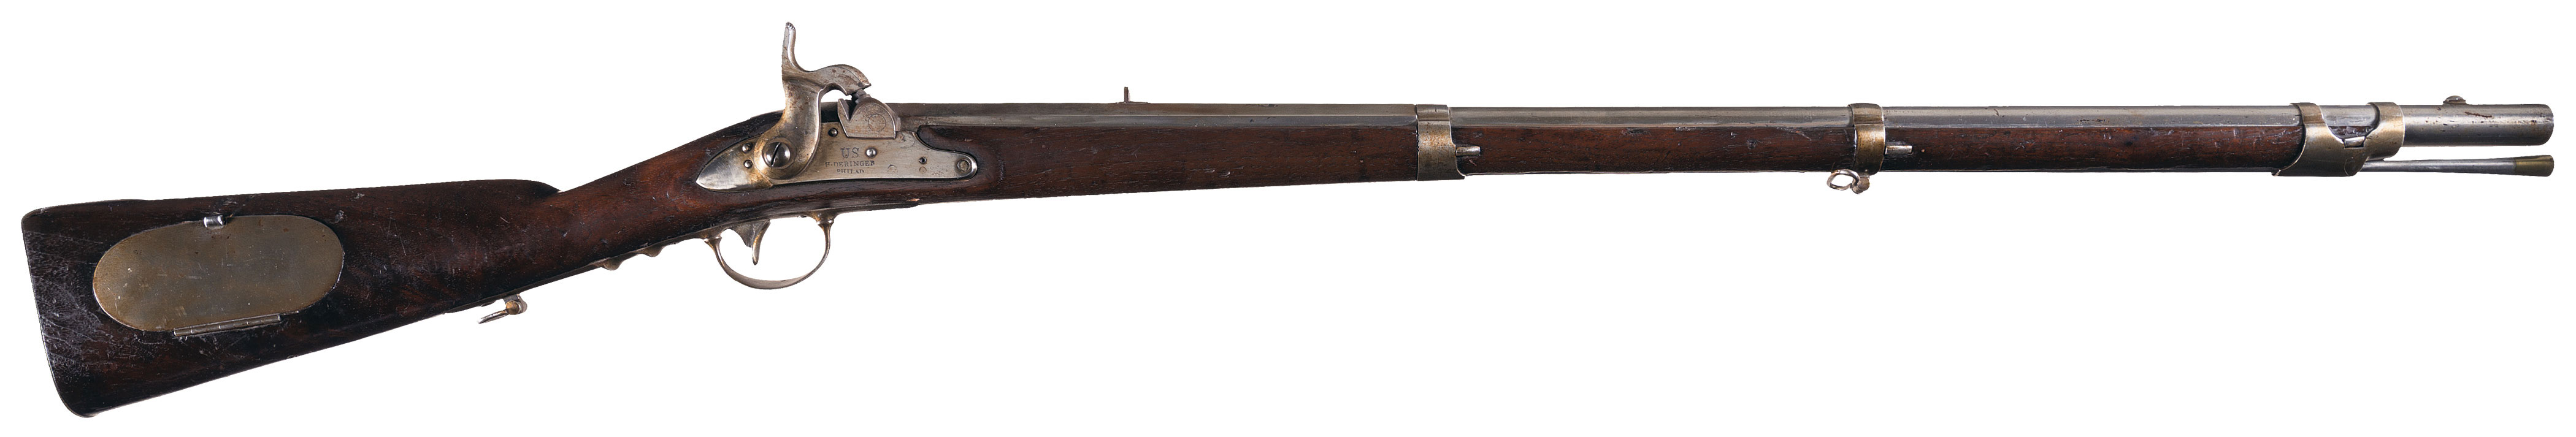 Henry Derringer U.S. Contract Model 1814 Percussion Rifle